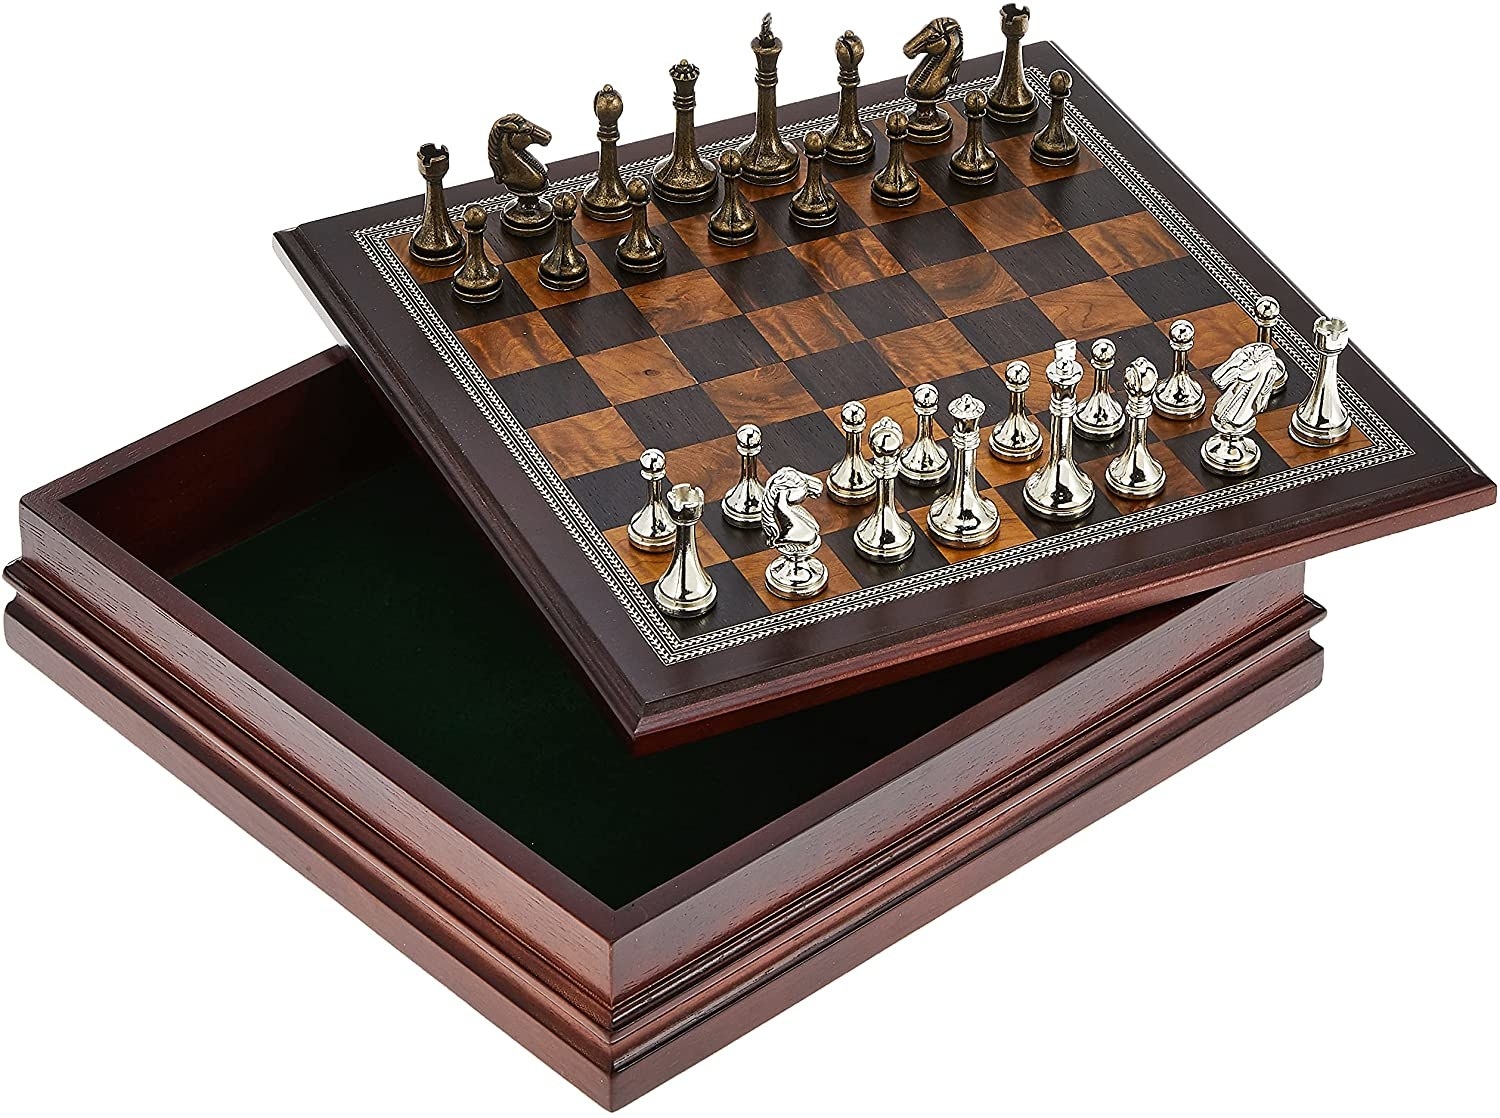 The chess set with the top half-on the base